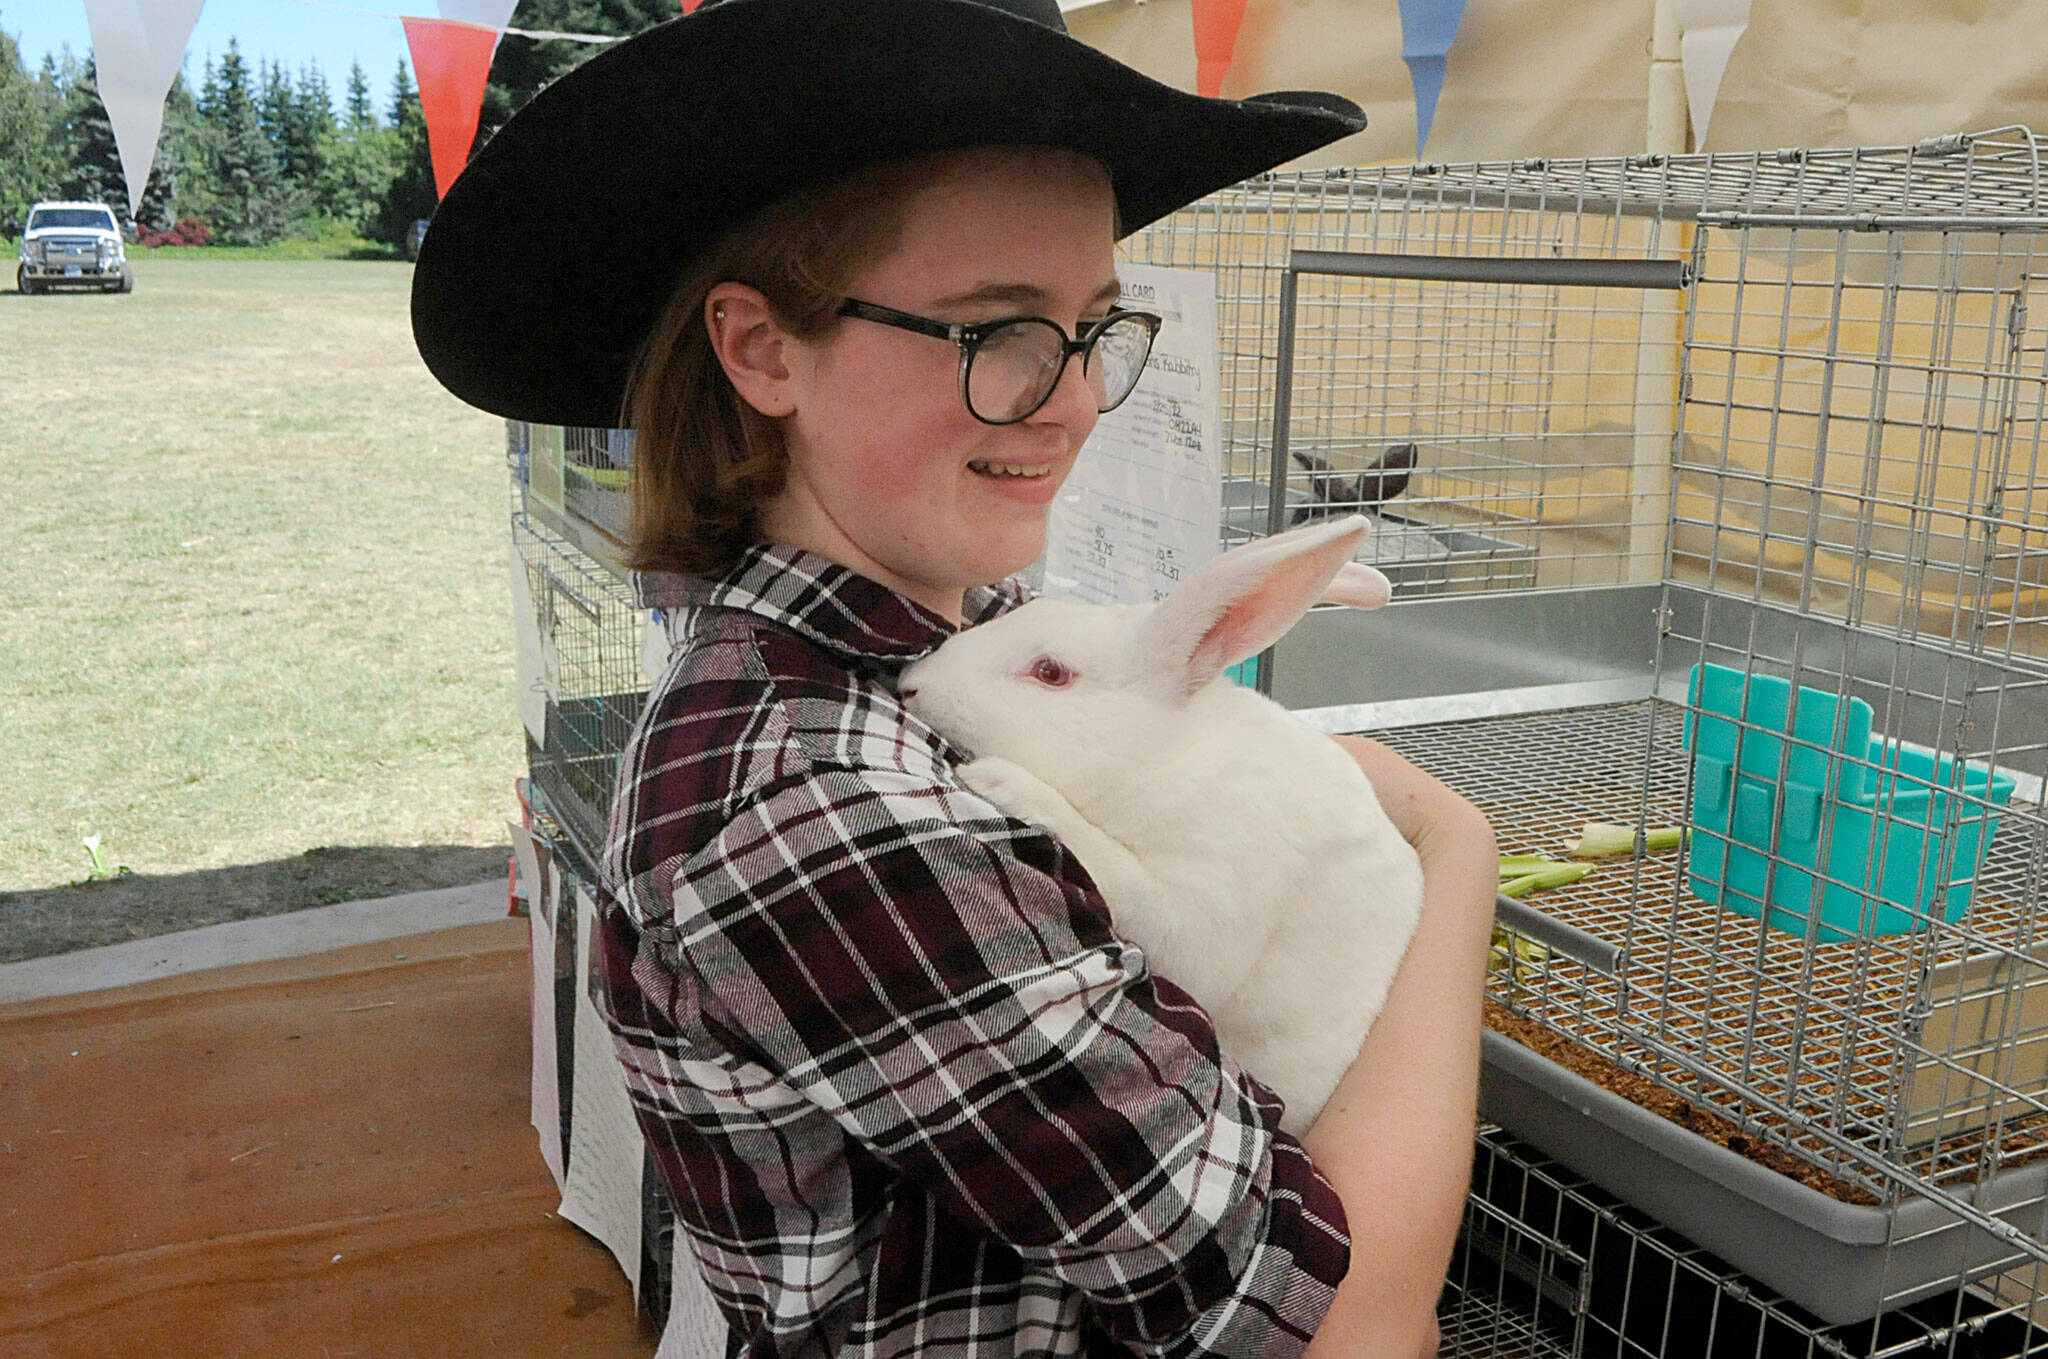 Matthew Nash / Olympic Peninsula News Group
Haley Petty, 17, of Agnew earned reserve market champion with Roast the rabbit at the Clallam County Junior Livestock Auction on Saturday at the Sequim Prairie Grange. It was her fifth year selling animals at the auction.